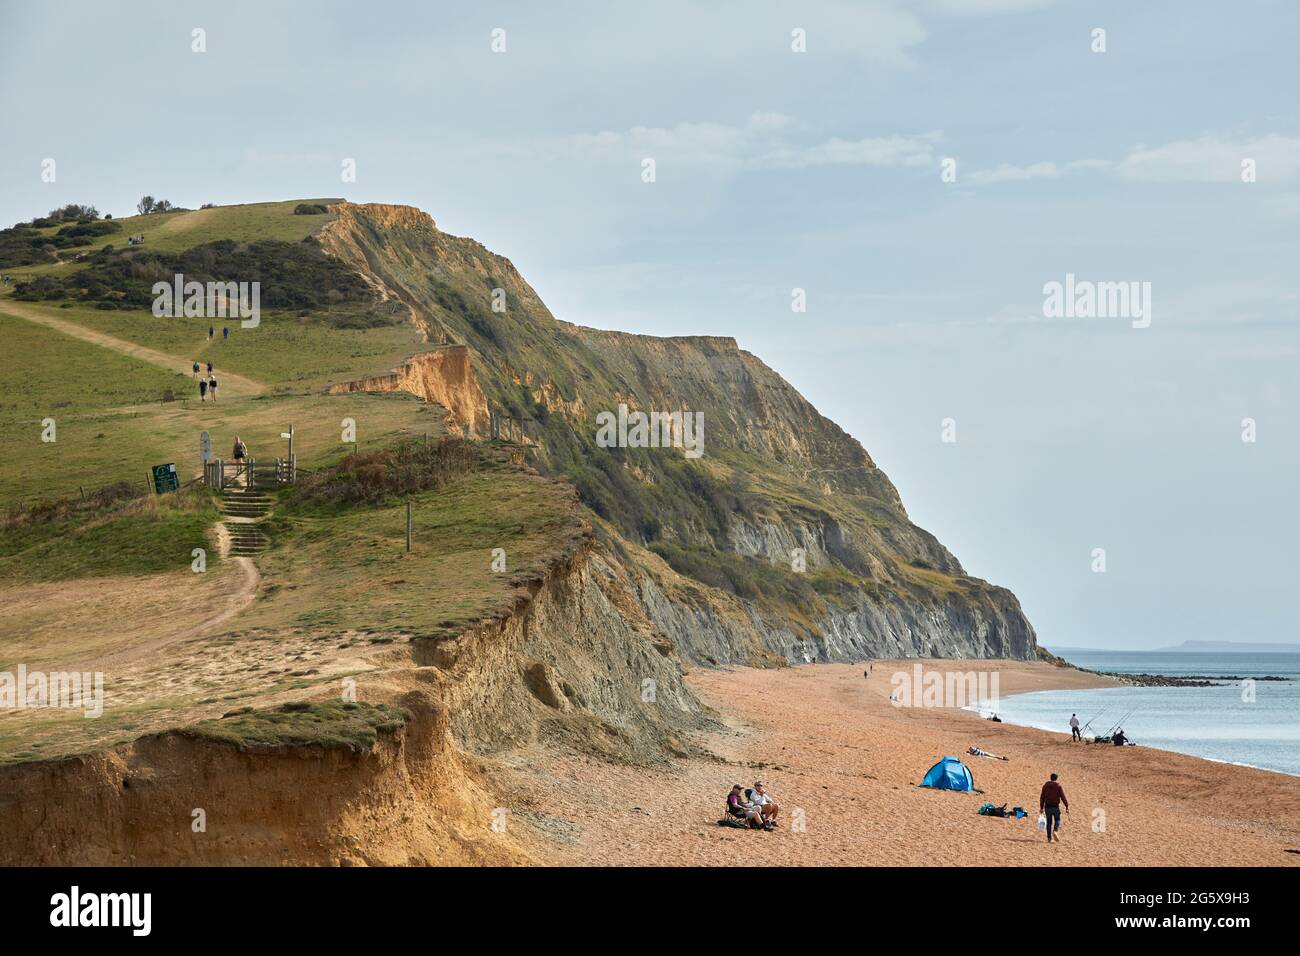 The South-West Coast Path at Seatown with a view of the beach, the shoreline and cliffs on the Jurassic Coast in Dorset, southwest England Stock Photo